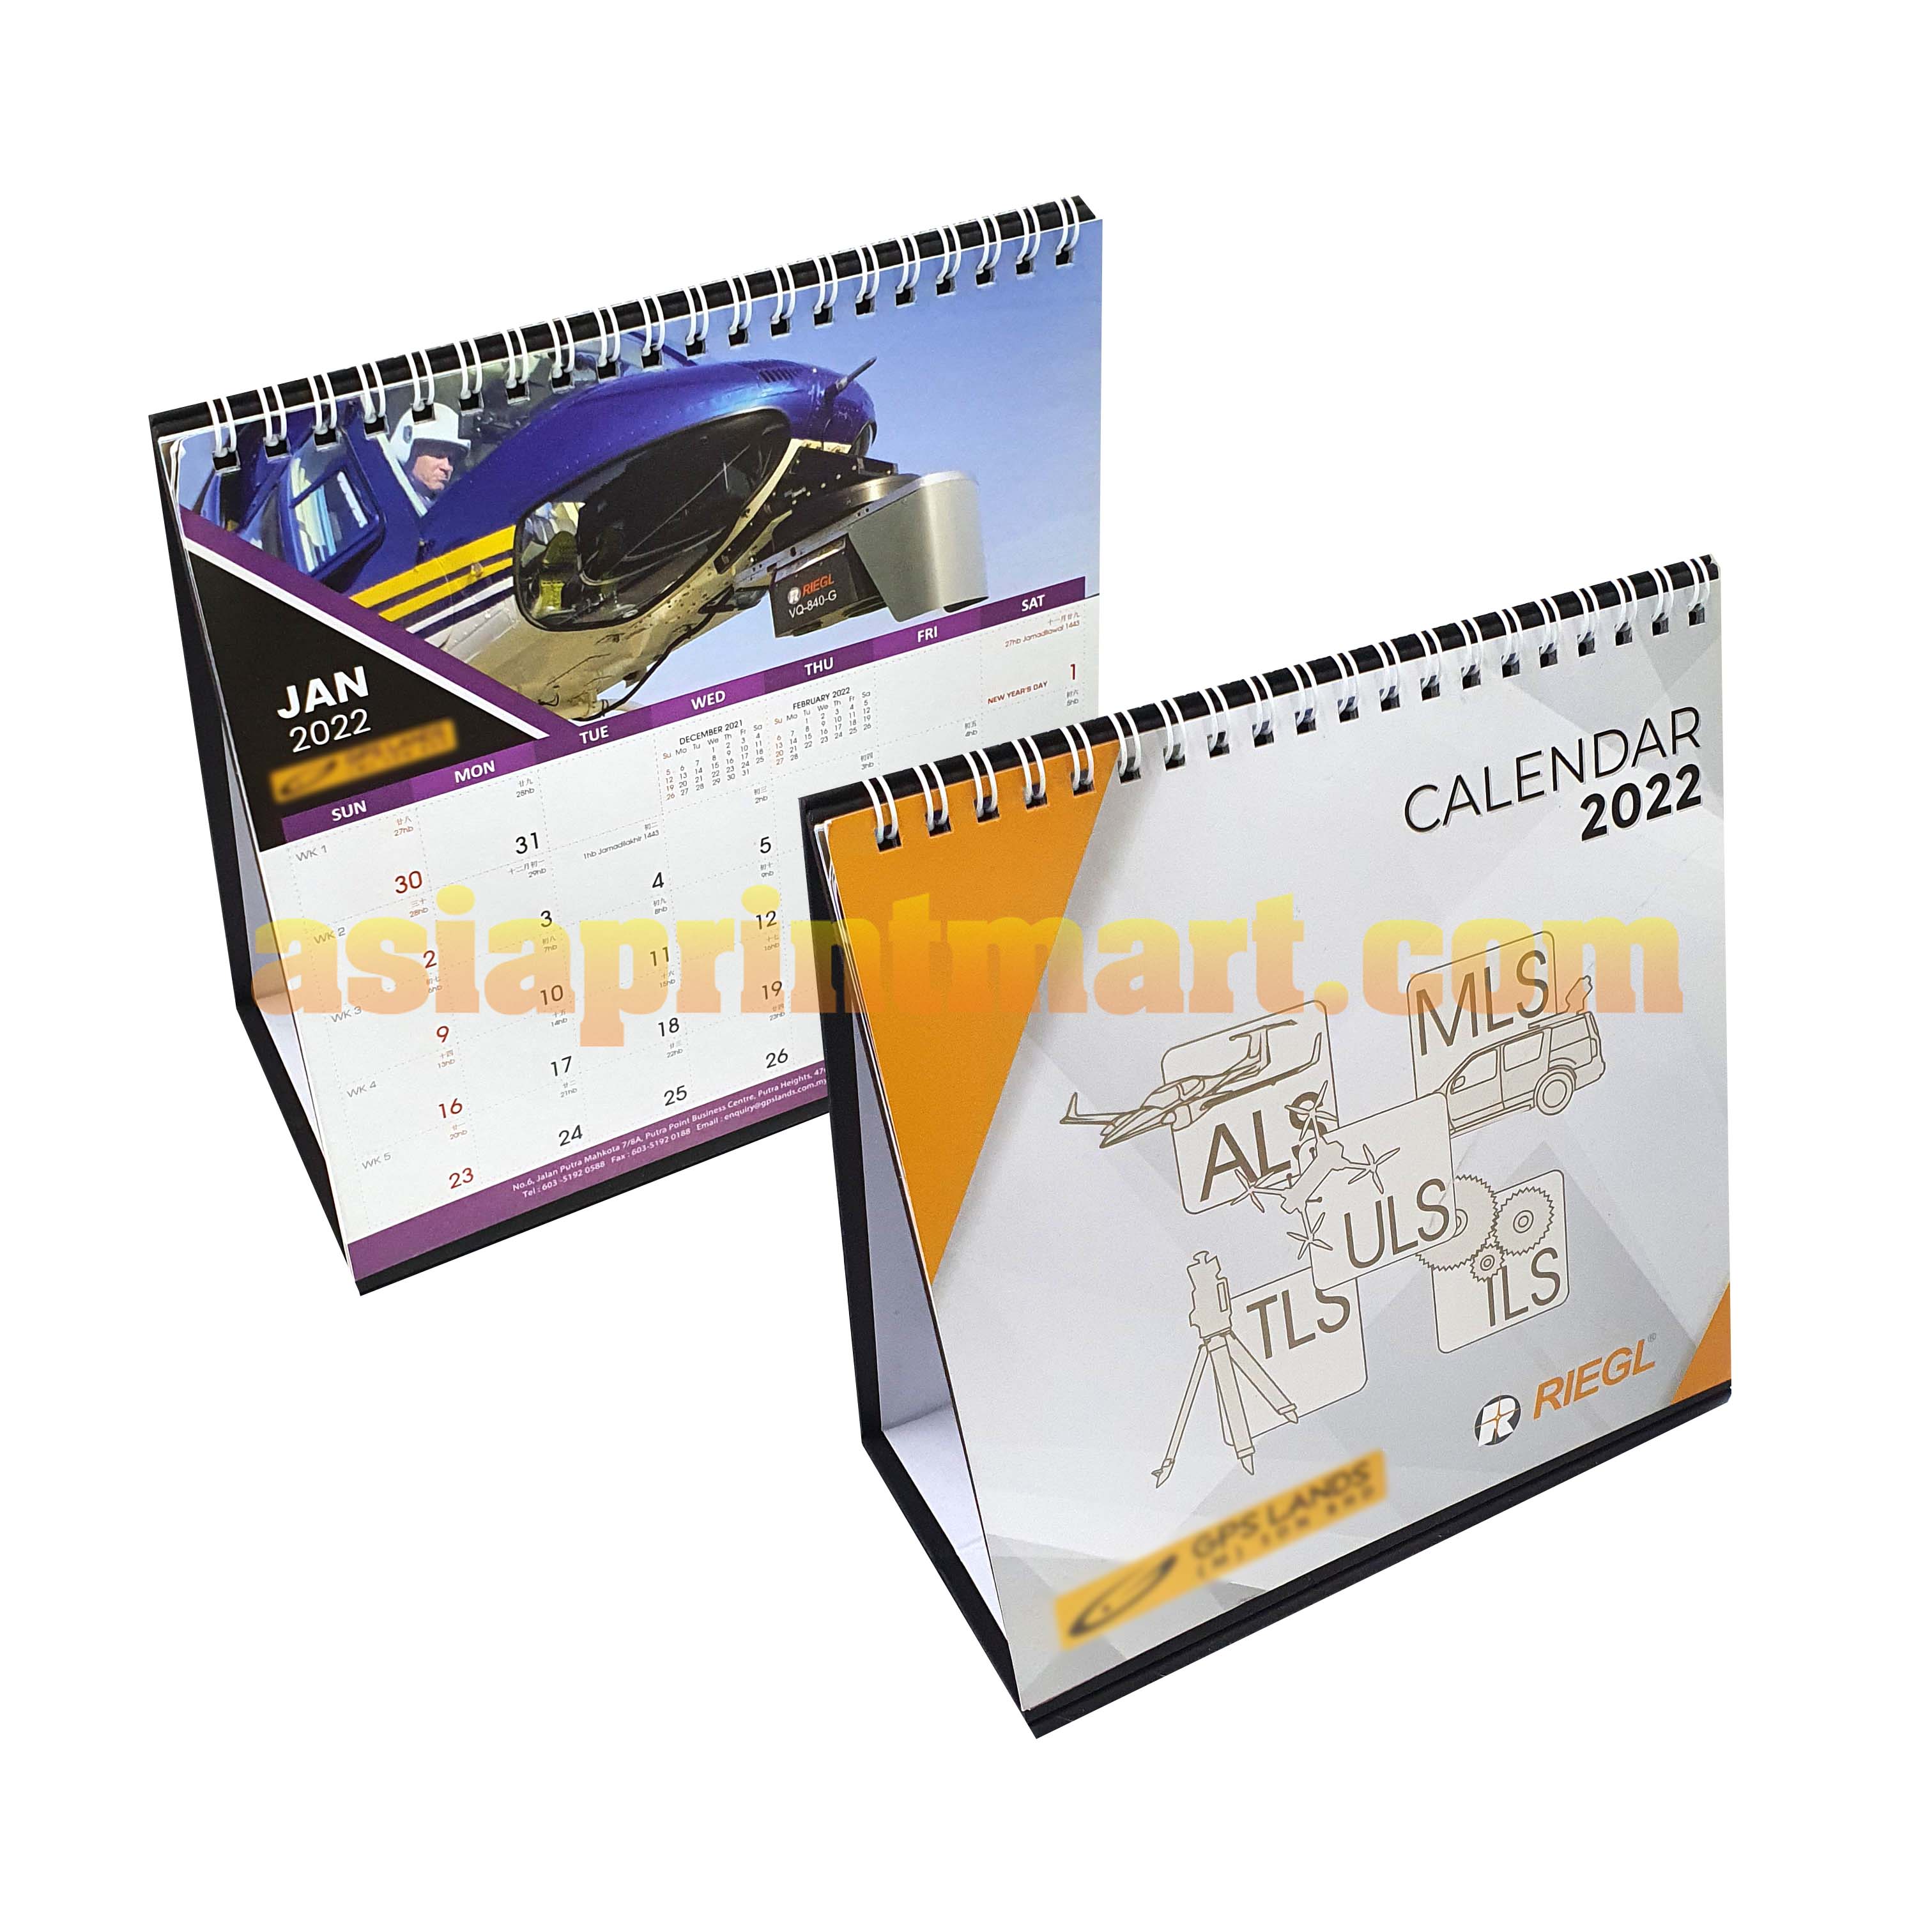 Magazines, Postcards, Calendars, Greeting Cards, Diaries, Notebooks, Label Stickers, Banners, Buntings, Vouchers,